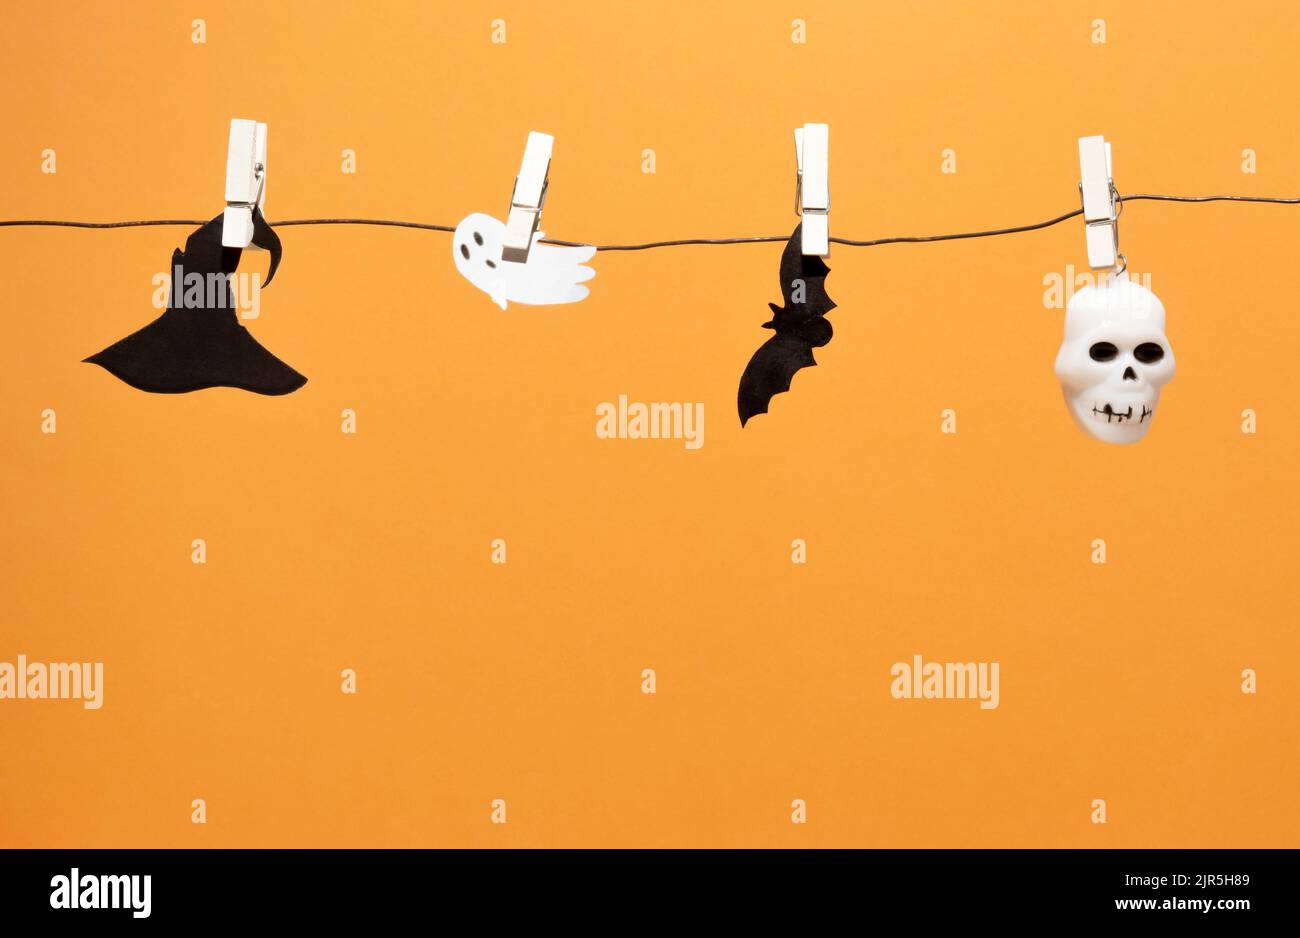 Bat silhouette, skull, ghost and witch's hat on clothesline with clothespins. Orange background with copy space. Trendy Halloween background. Stock Photo